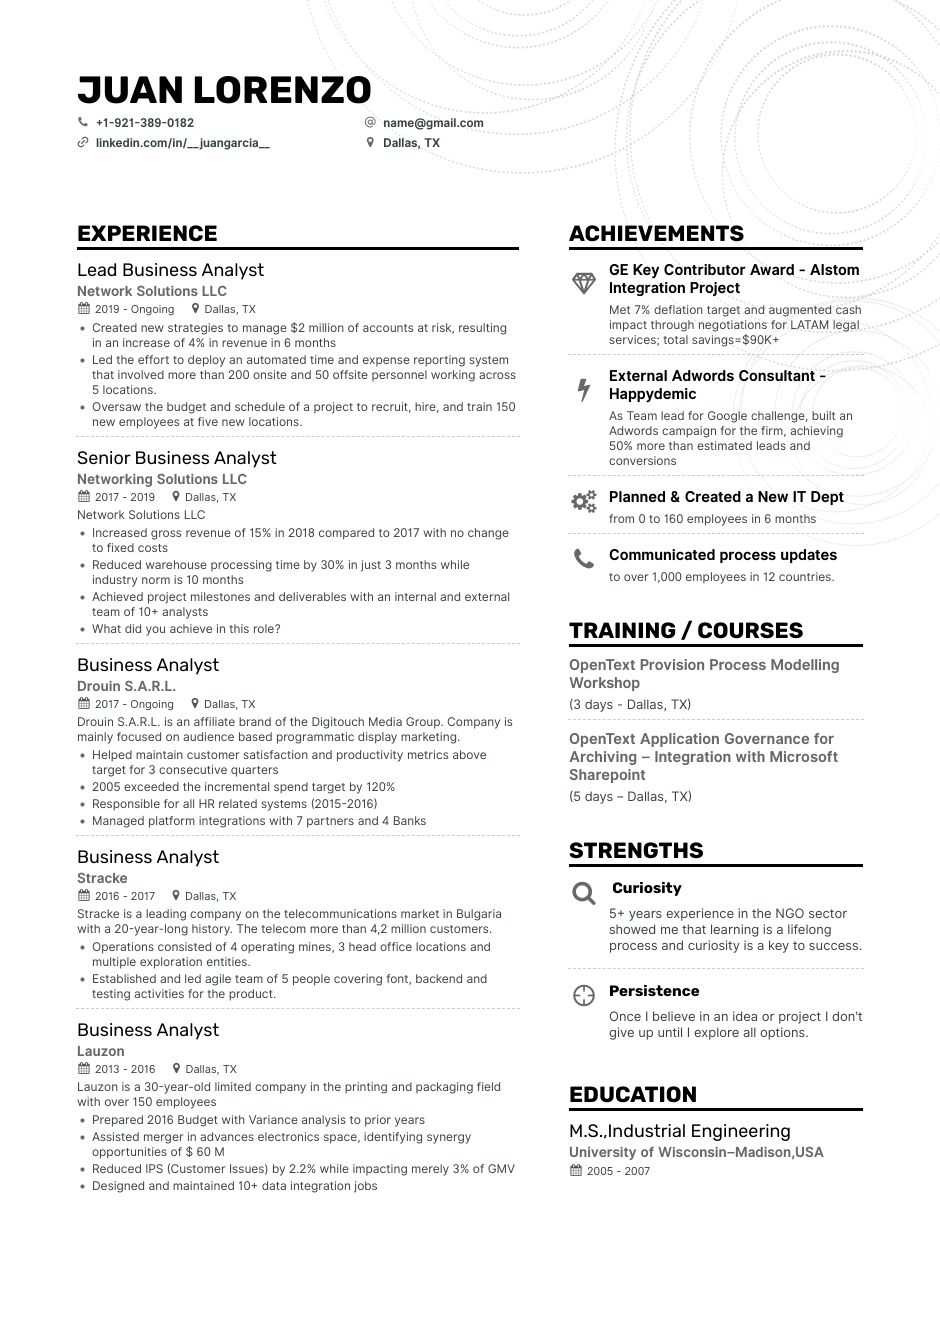 Sample Resume Summary for Business Analyst Business Analyst Resume Examples, Samples, and Tips